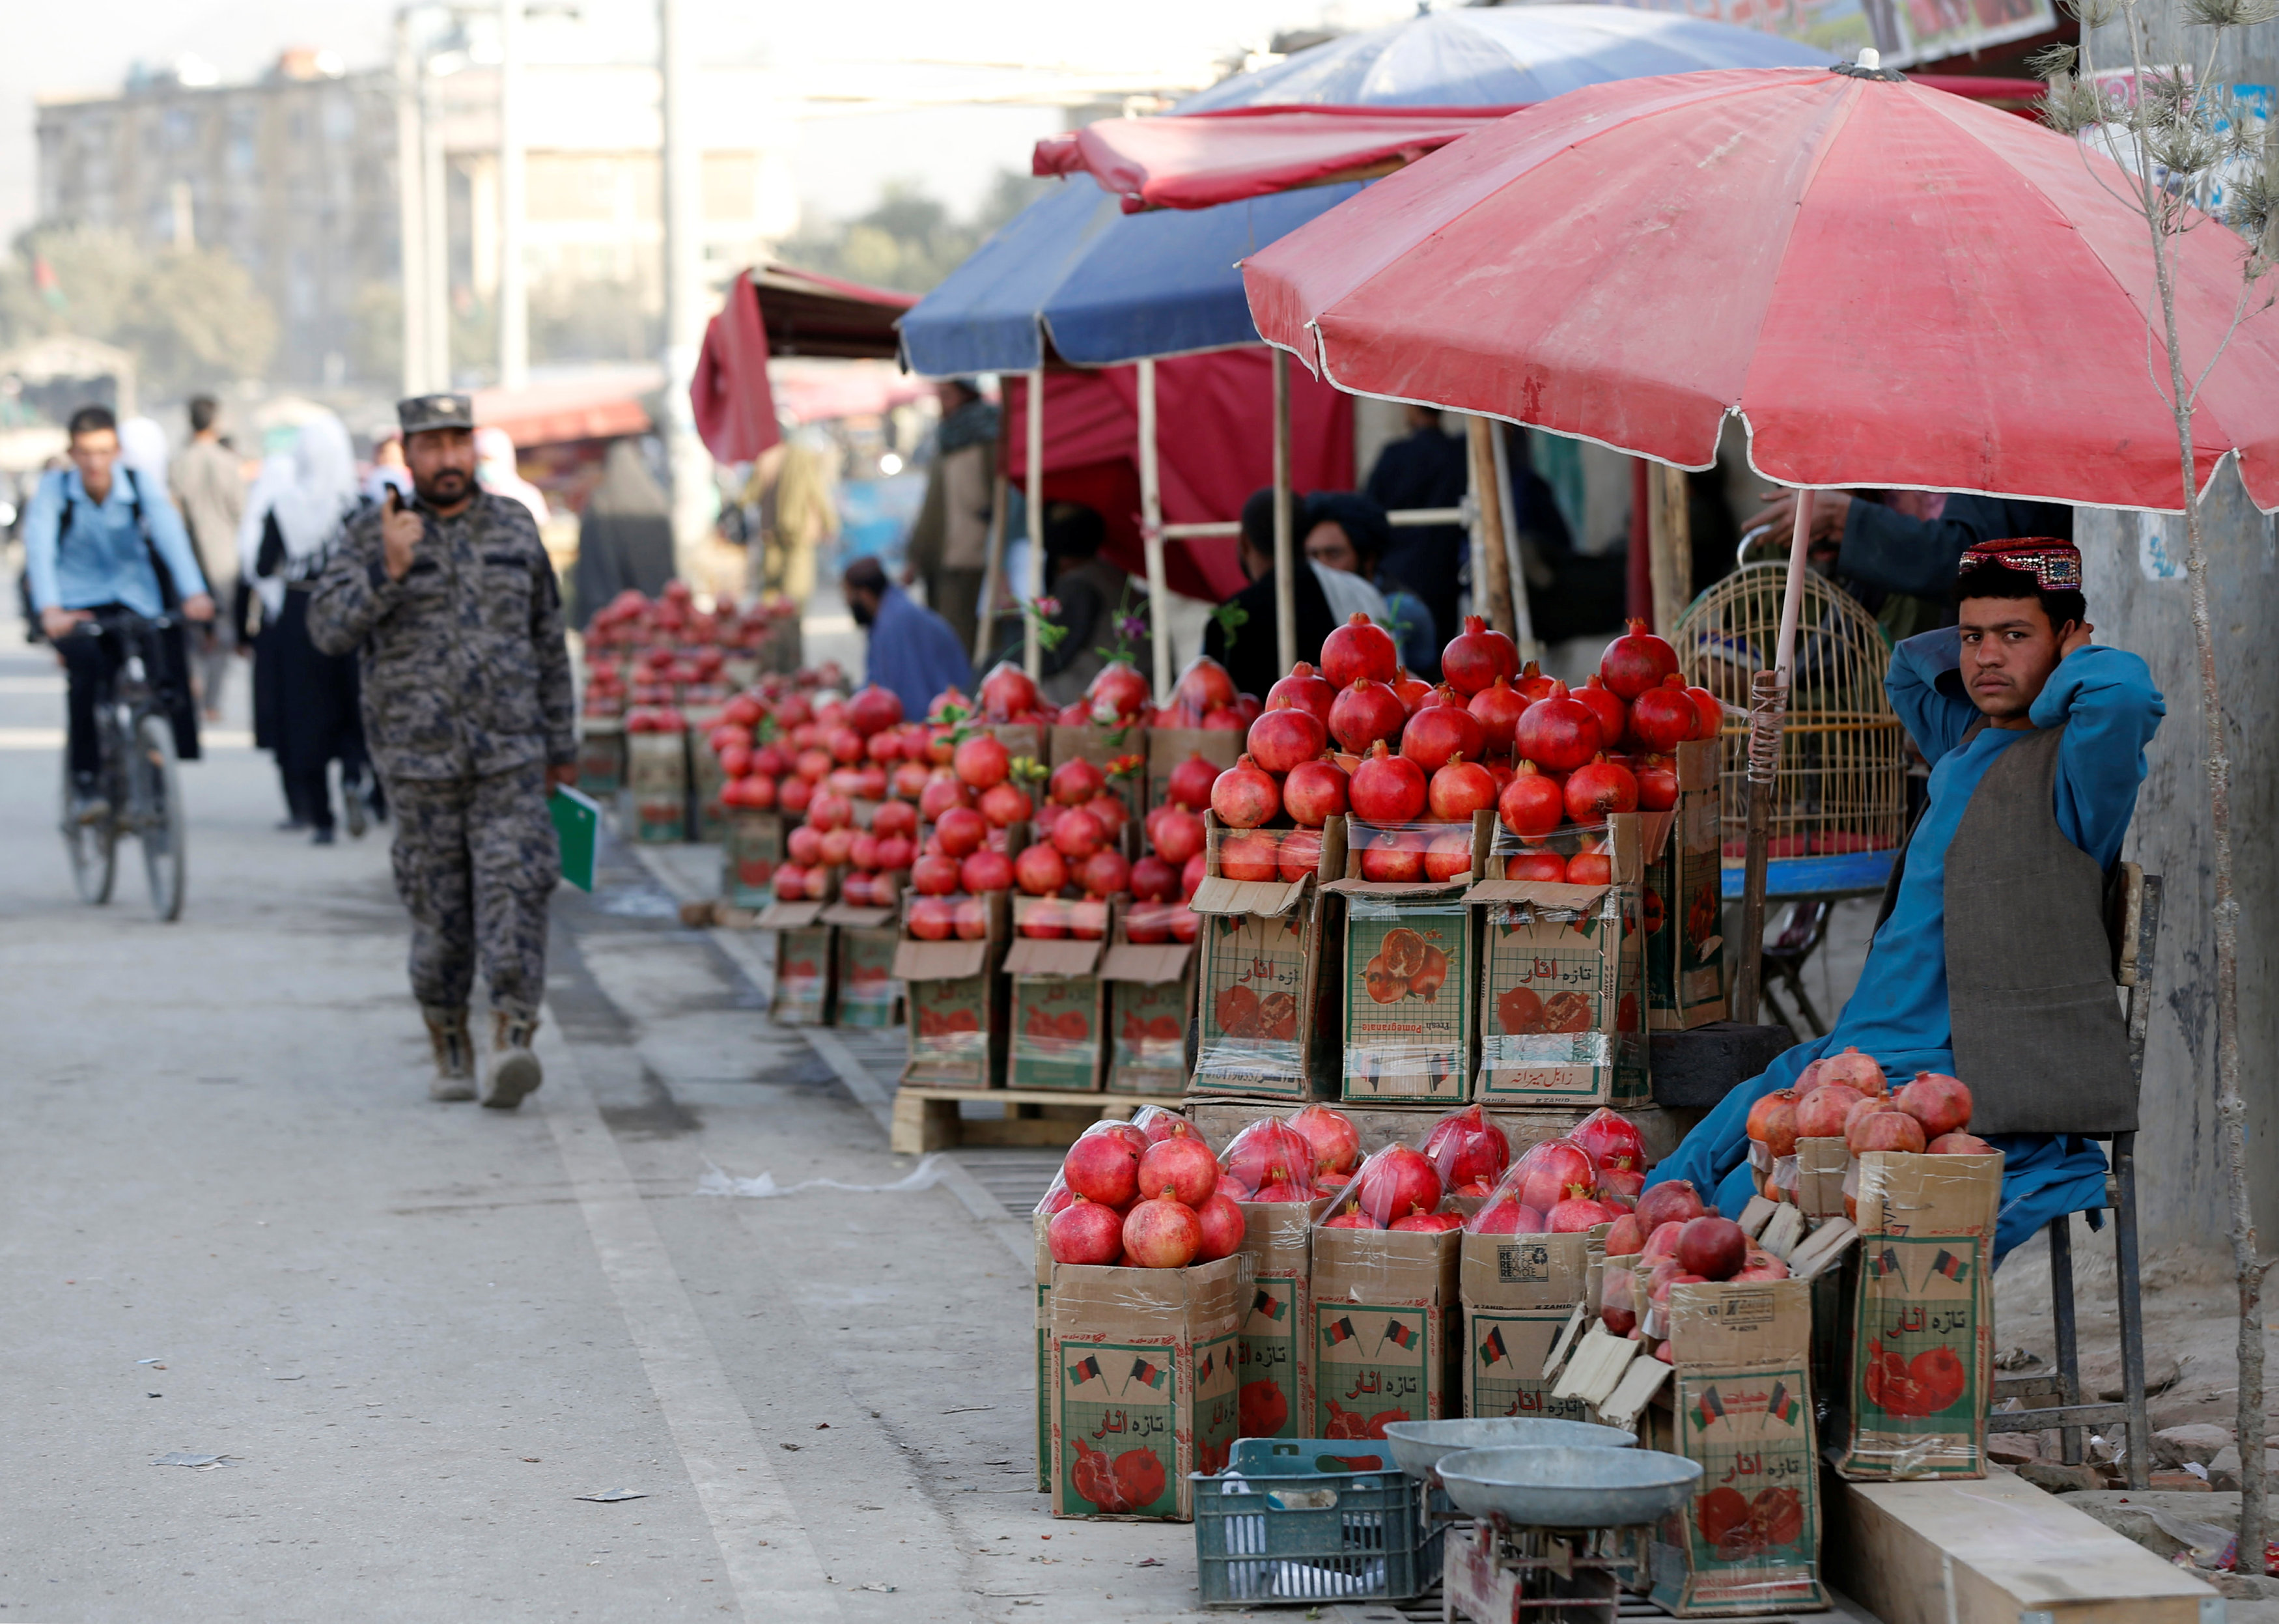 An Afghan man sells pomegranates along a street in Kabul, Afghanistan October 19, 2016. REUTERS/Omar Sobhani